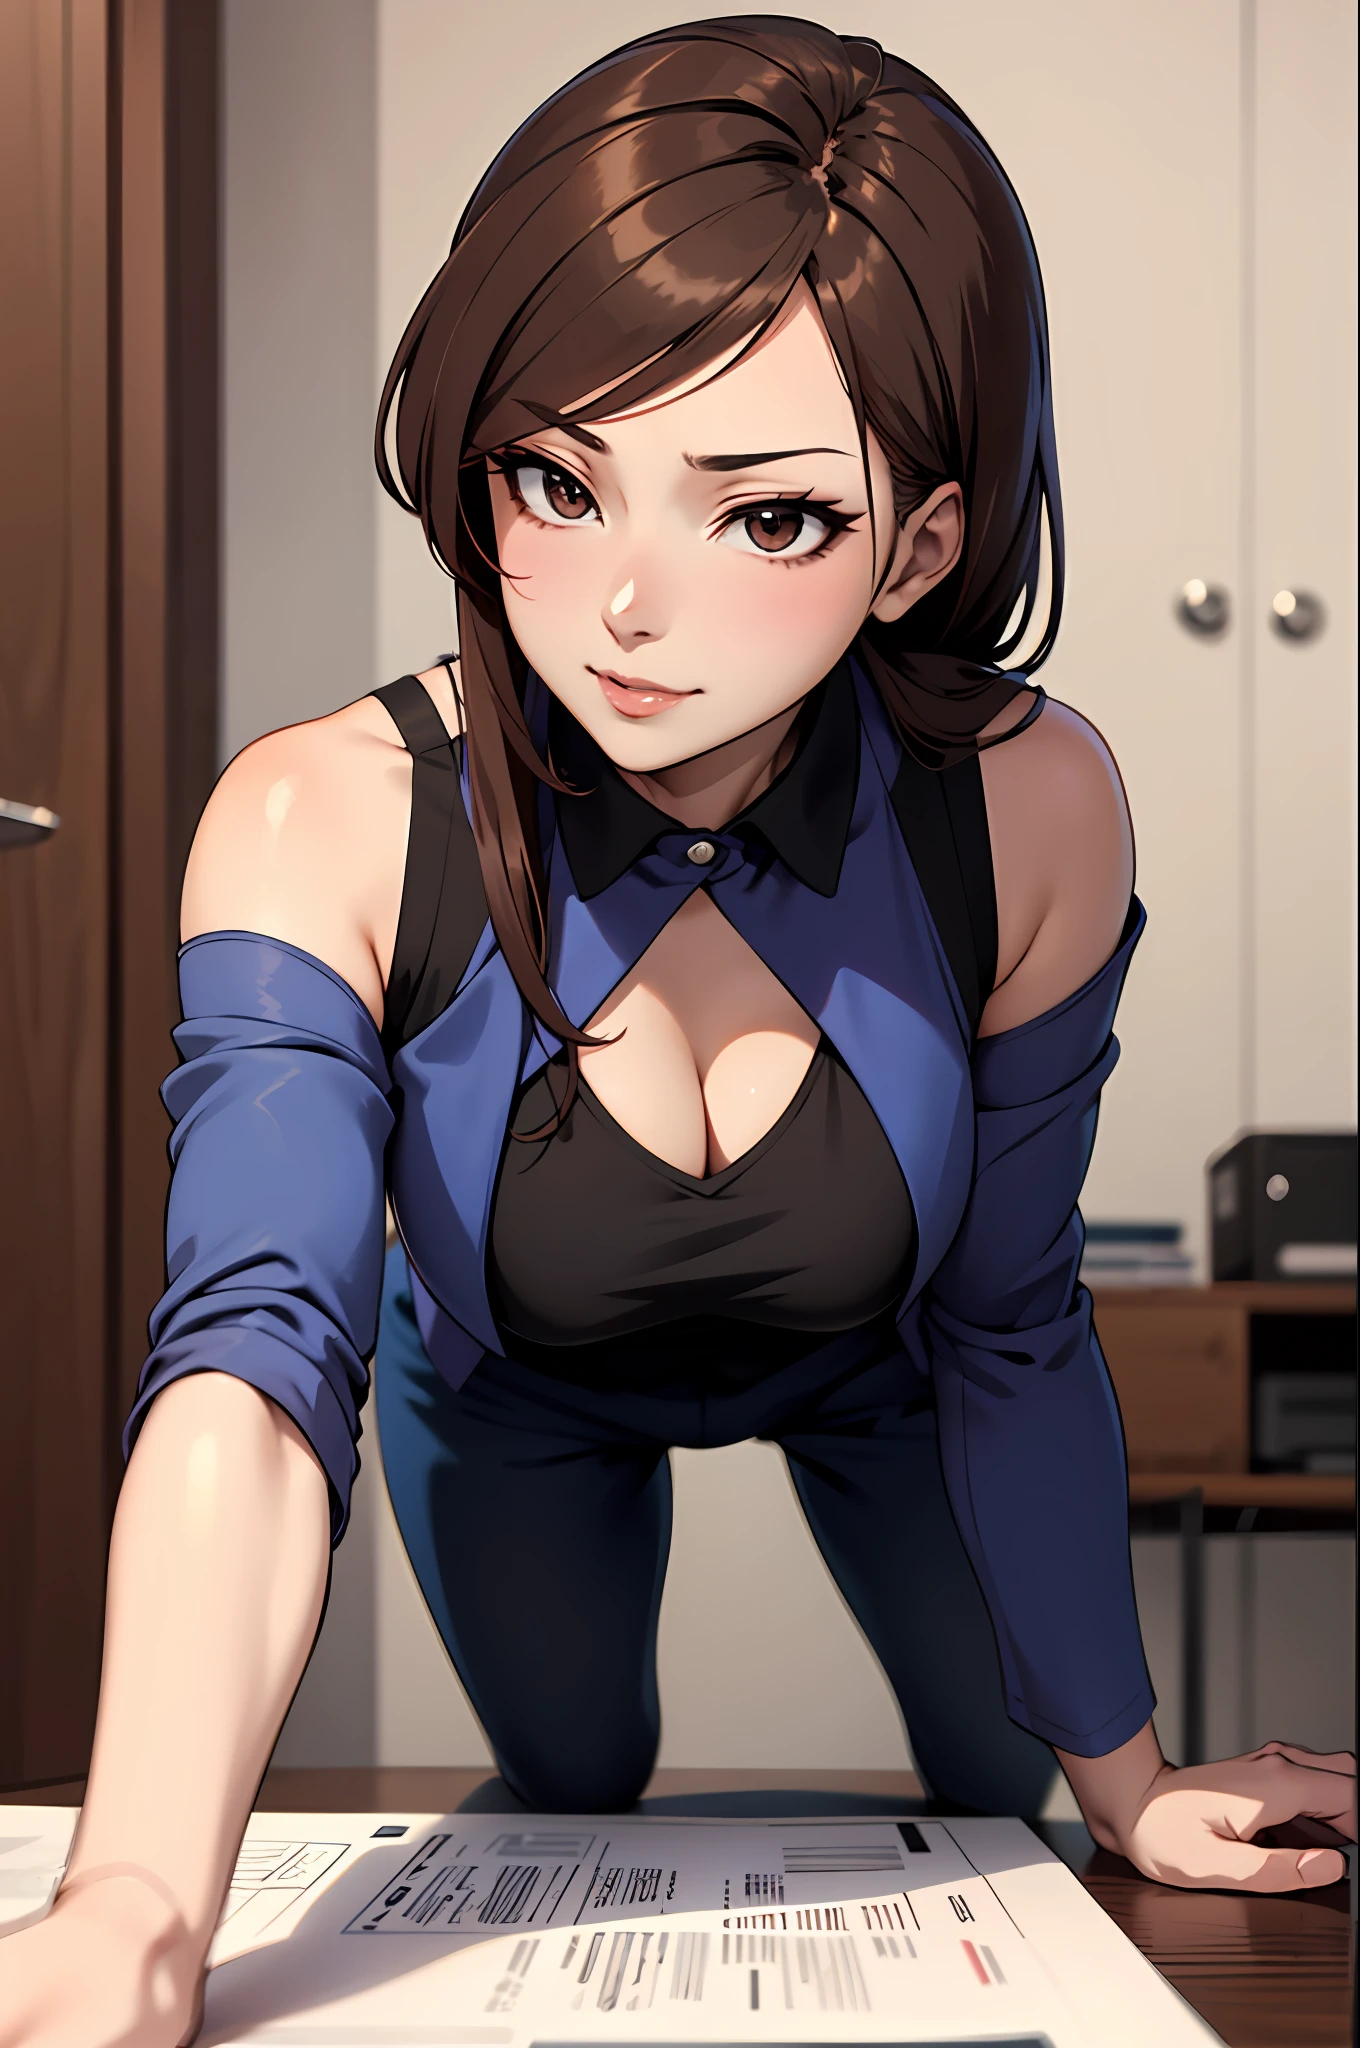 Anime girl in blue suit with black top and brown hair, Seductive Anime Girl, Ecchi anime style, , beautiful alluring anime woman, bending forward,Kamimei,